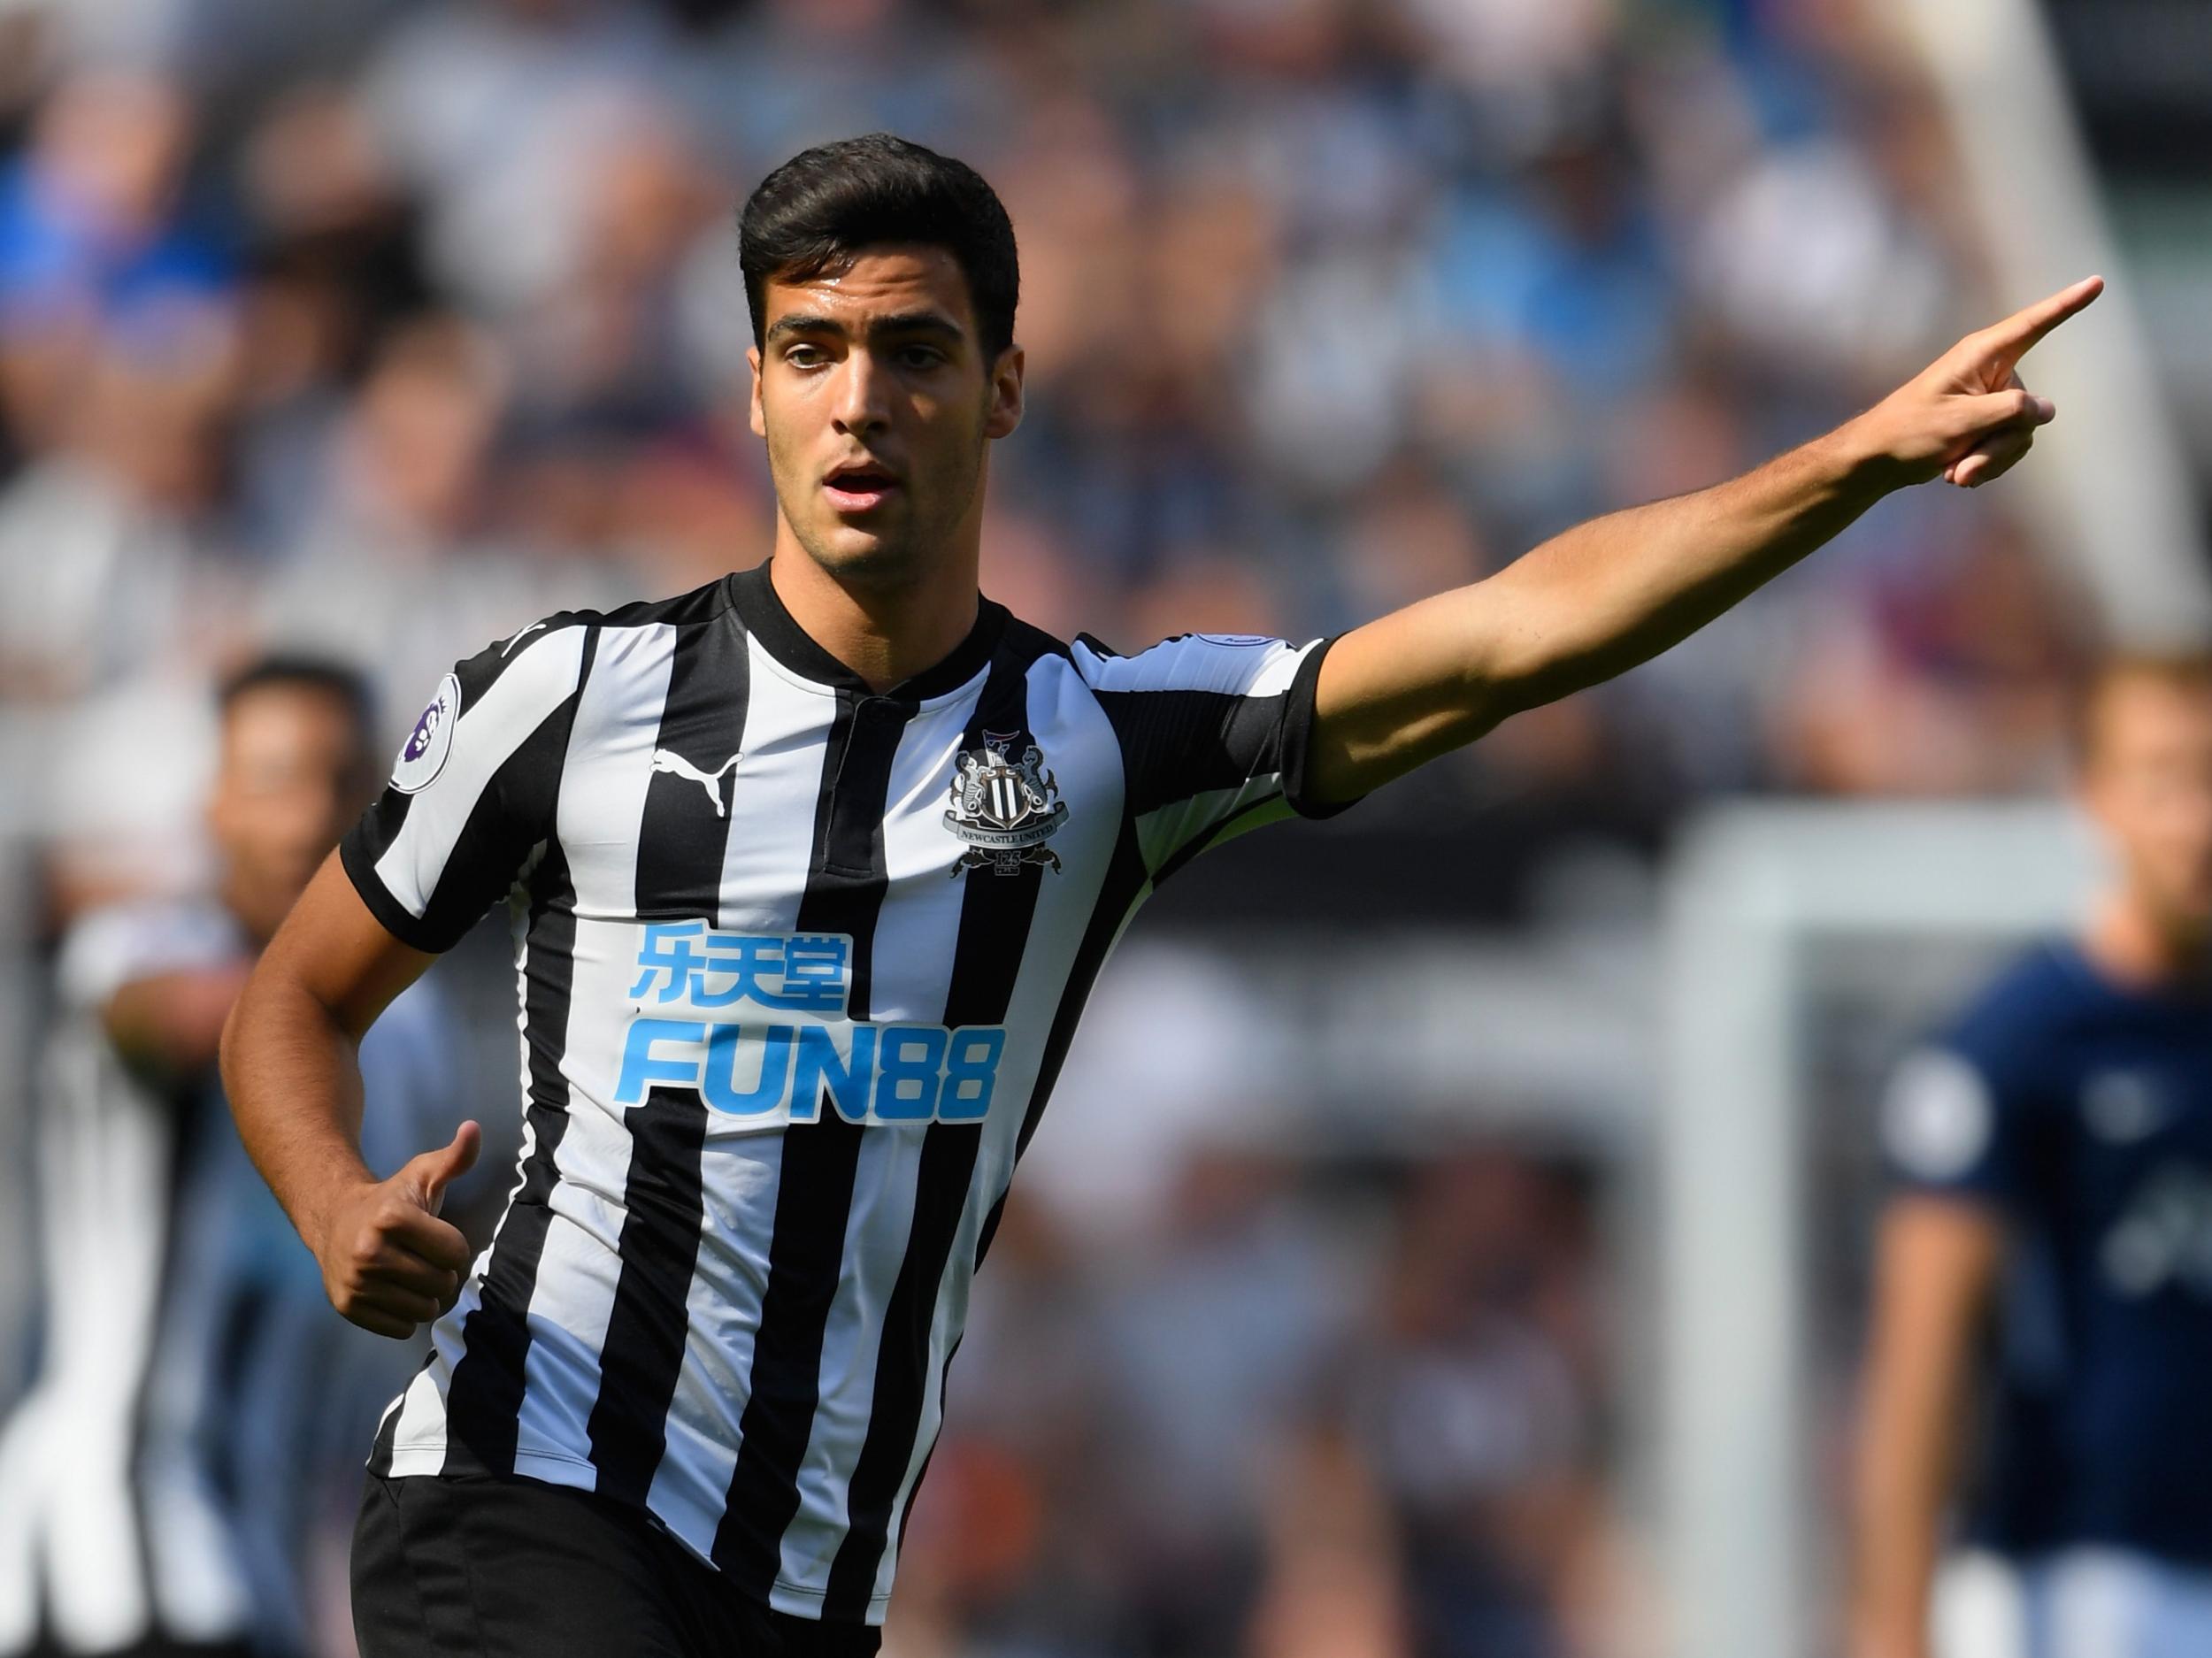 Newcastle have made the move permanent after only seven games